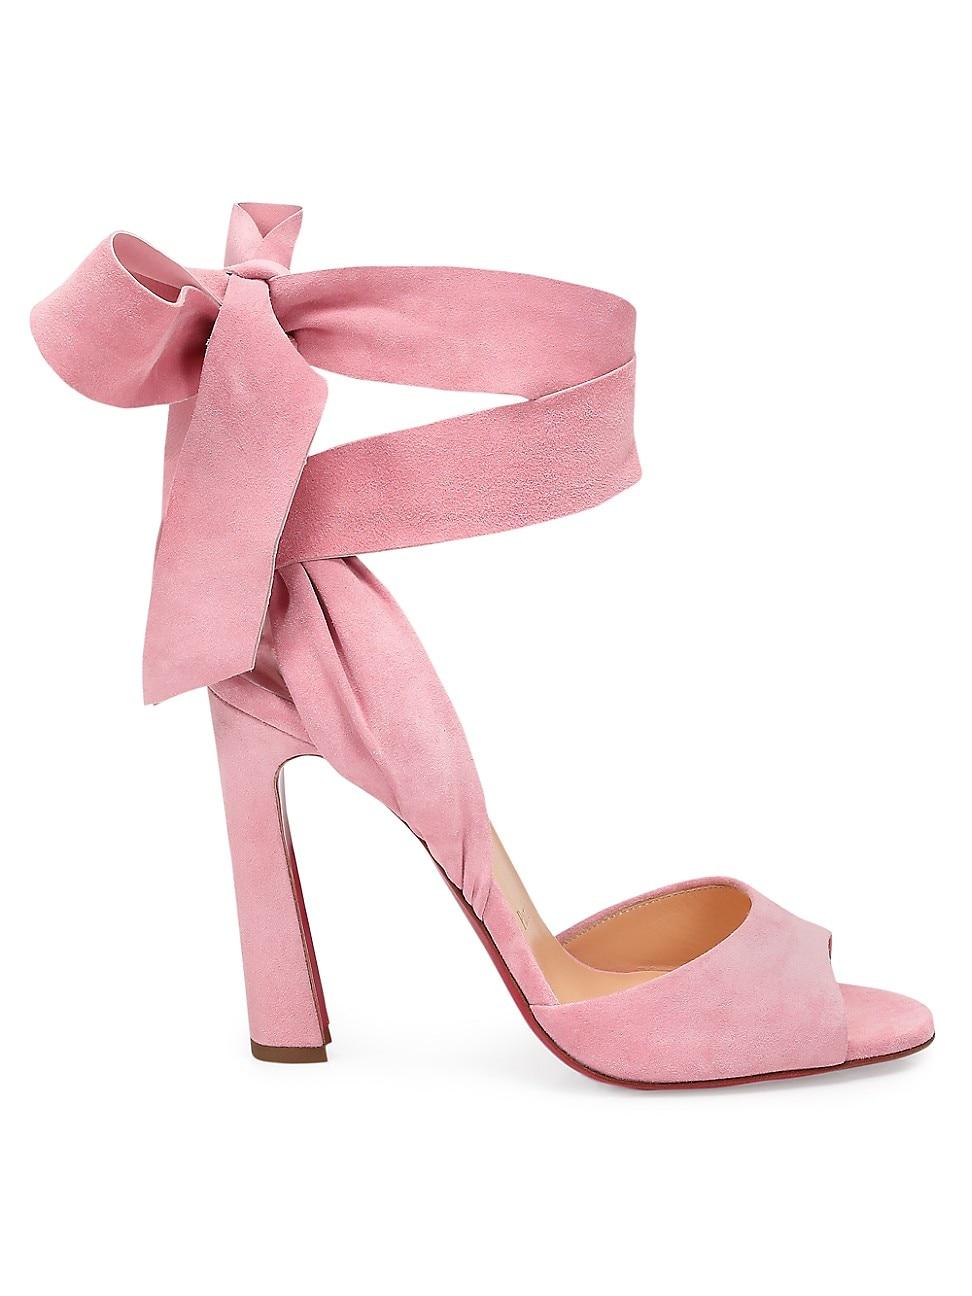 Christian Louboutin Rose Amelie Ankle-tie Suede Sandals in Pink | Lyst